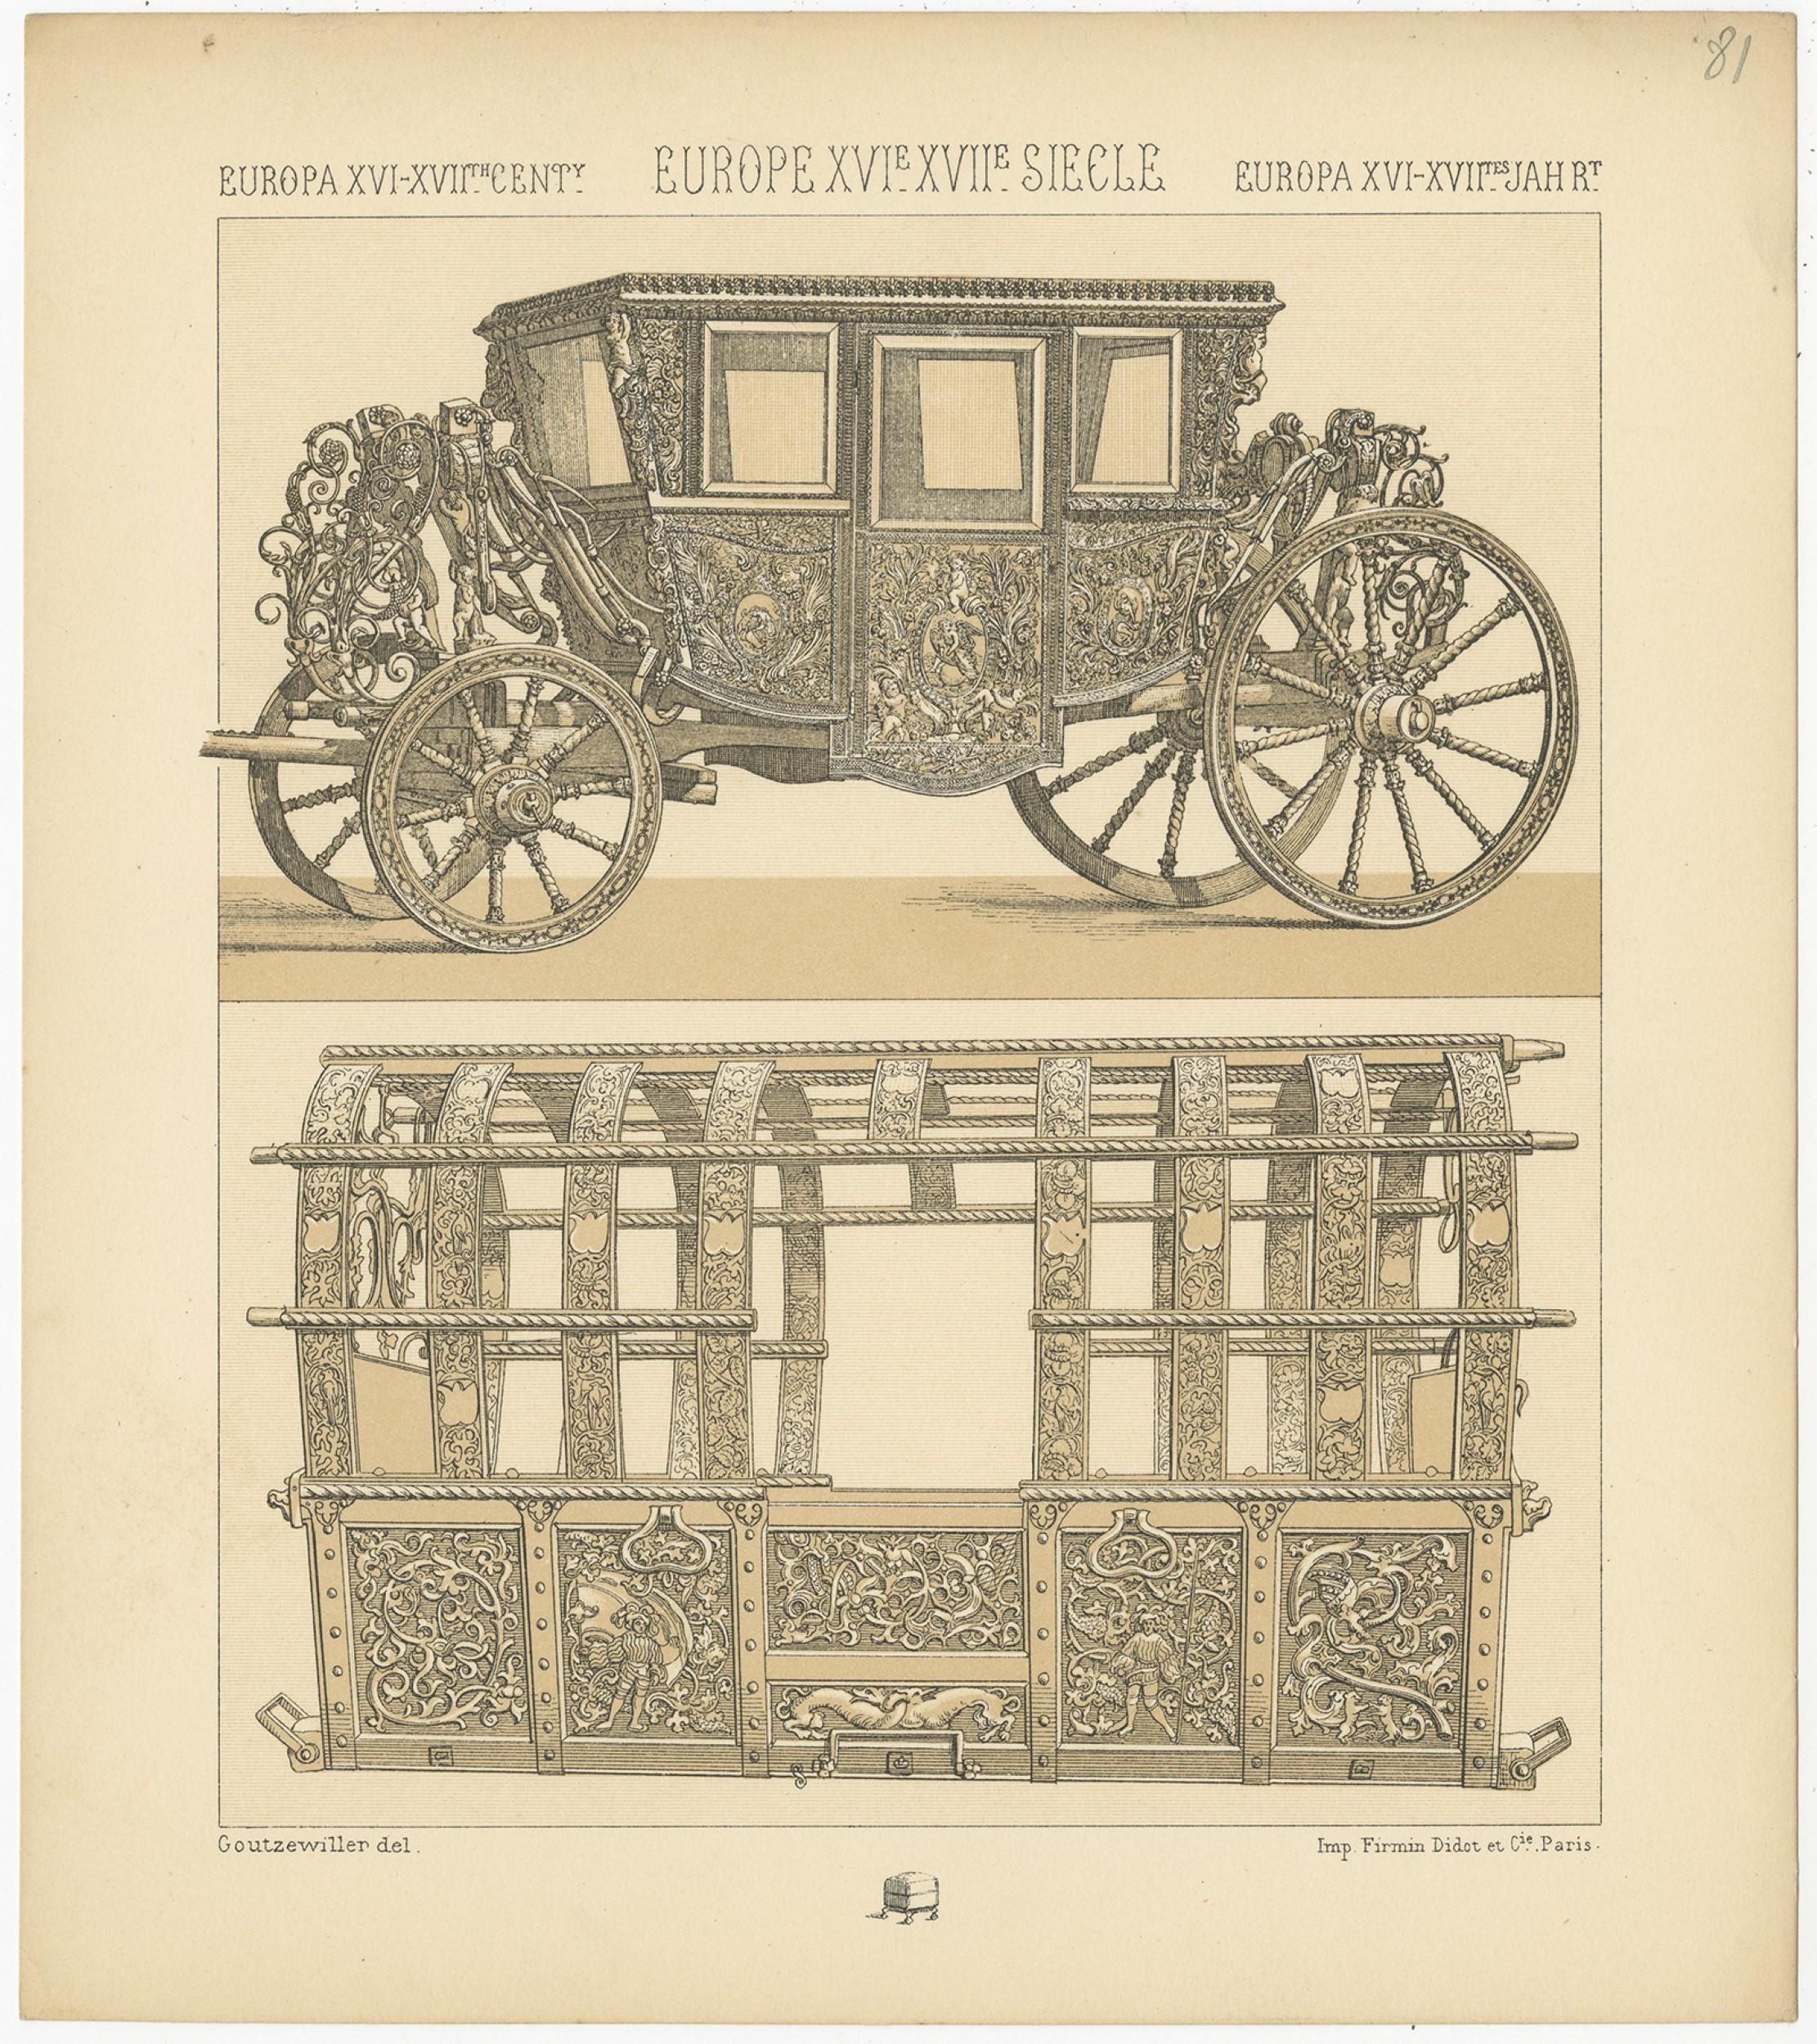 Antique print titled 'Europa XVI, XVIIth Cent - Europe XVIe, XVIIe Siecle - Europa XVIt, XVIItes Jahr'. Chromolithograph of European 16th-17th century carriage. This print originates from 'Le Costume Historique' by M.A. Racinet. Published circa 1880.